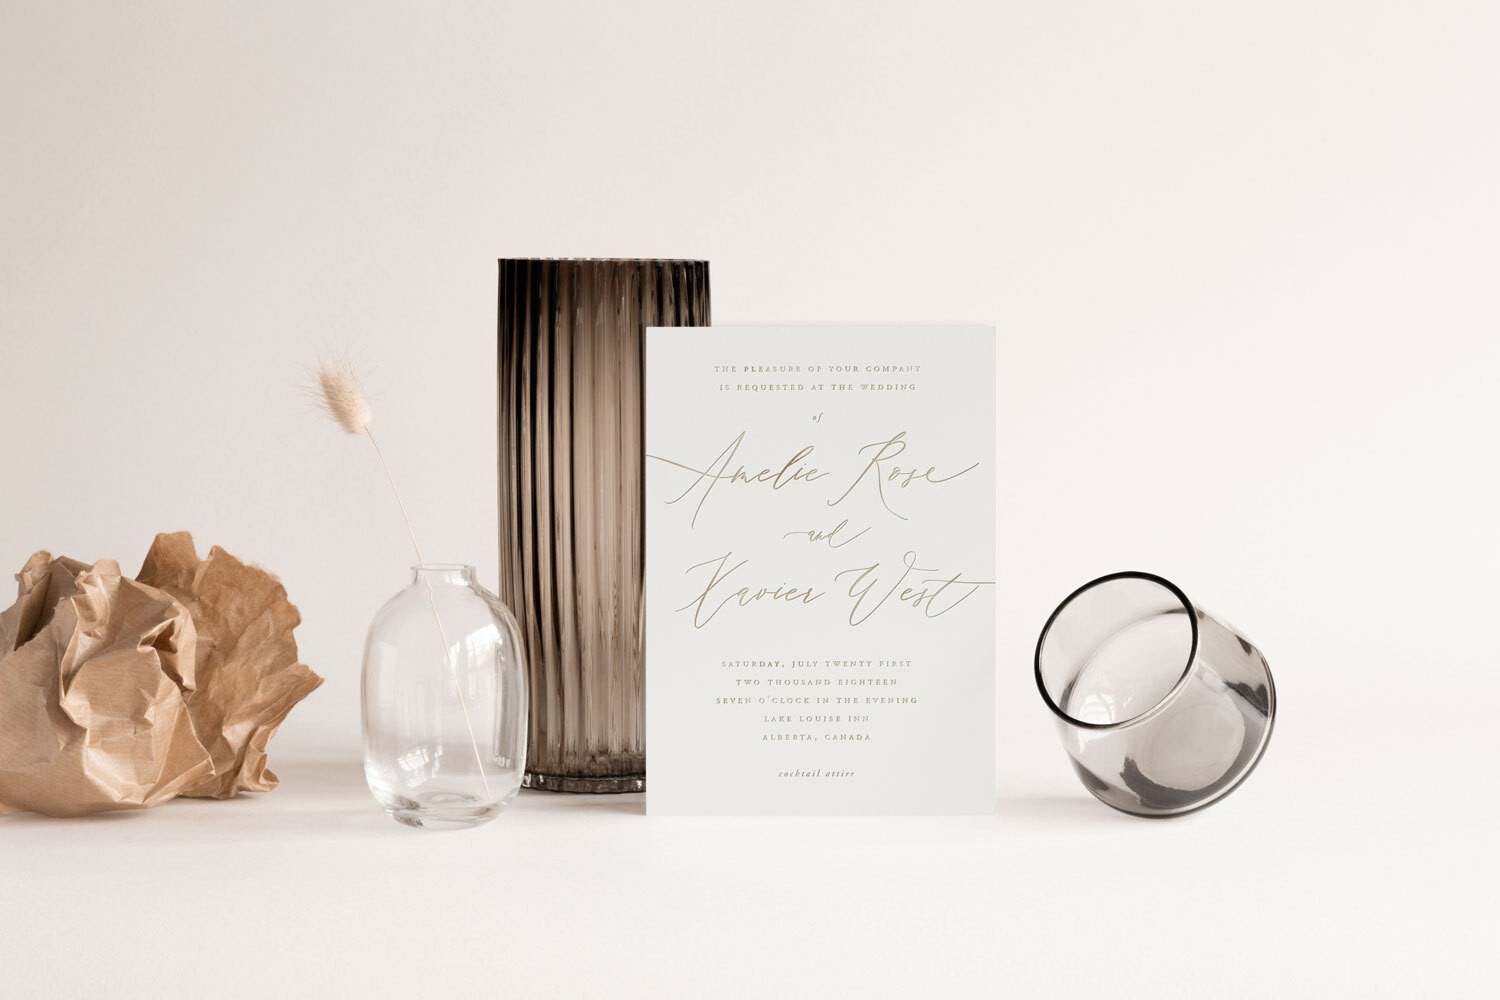 A white wedding invitation with calligraphy for a couple named Amelie and Xavier